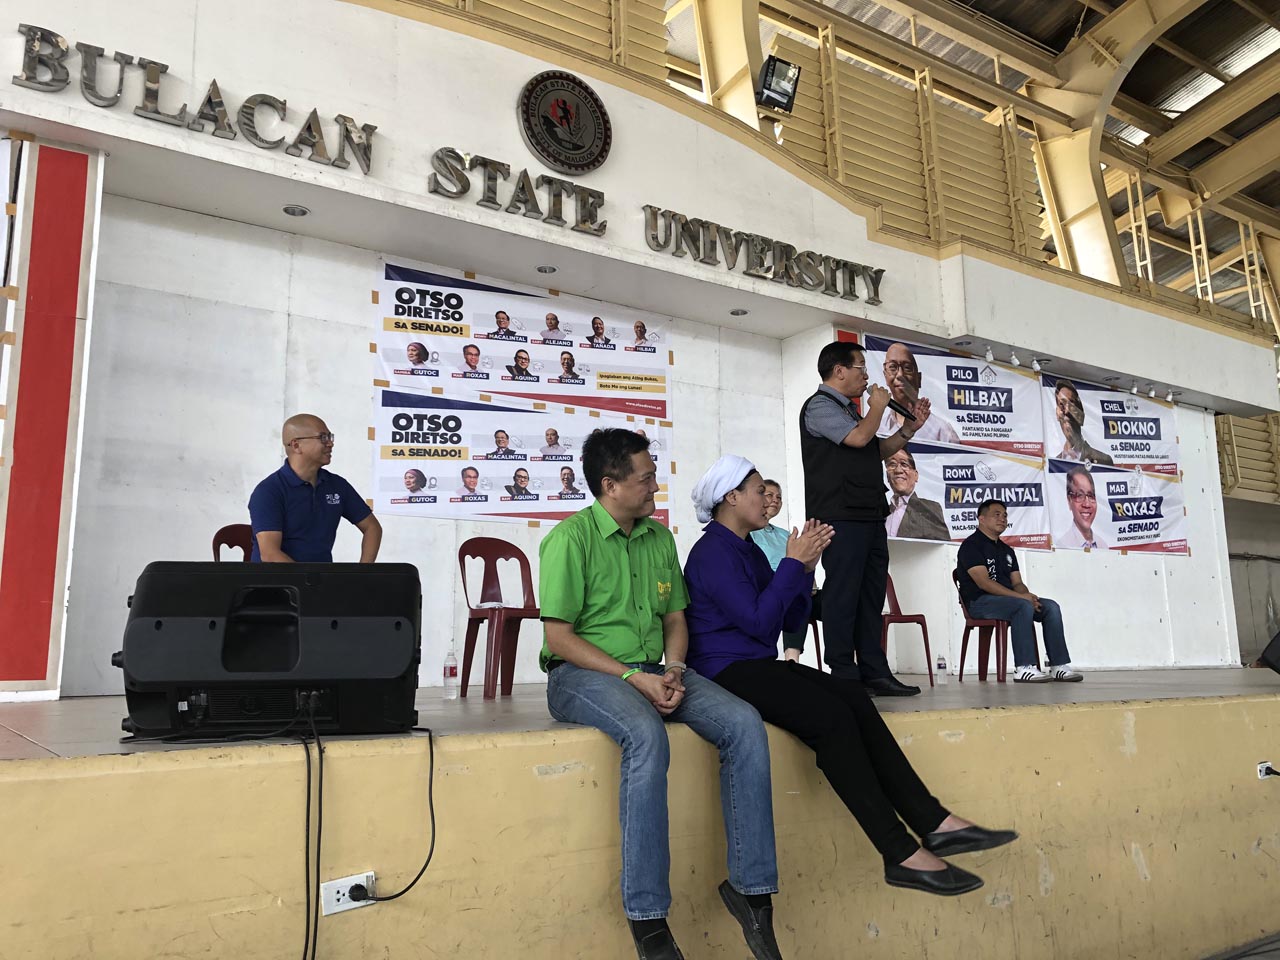 TALKING COLLEGE DEGREES. Otso Diretso bets tell BSU students: You're working hard to graduate, why vote for an administration bet who lies about her college degrees, referring to Imee Marcos. Photo by Mara Cepeda 